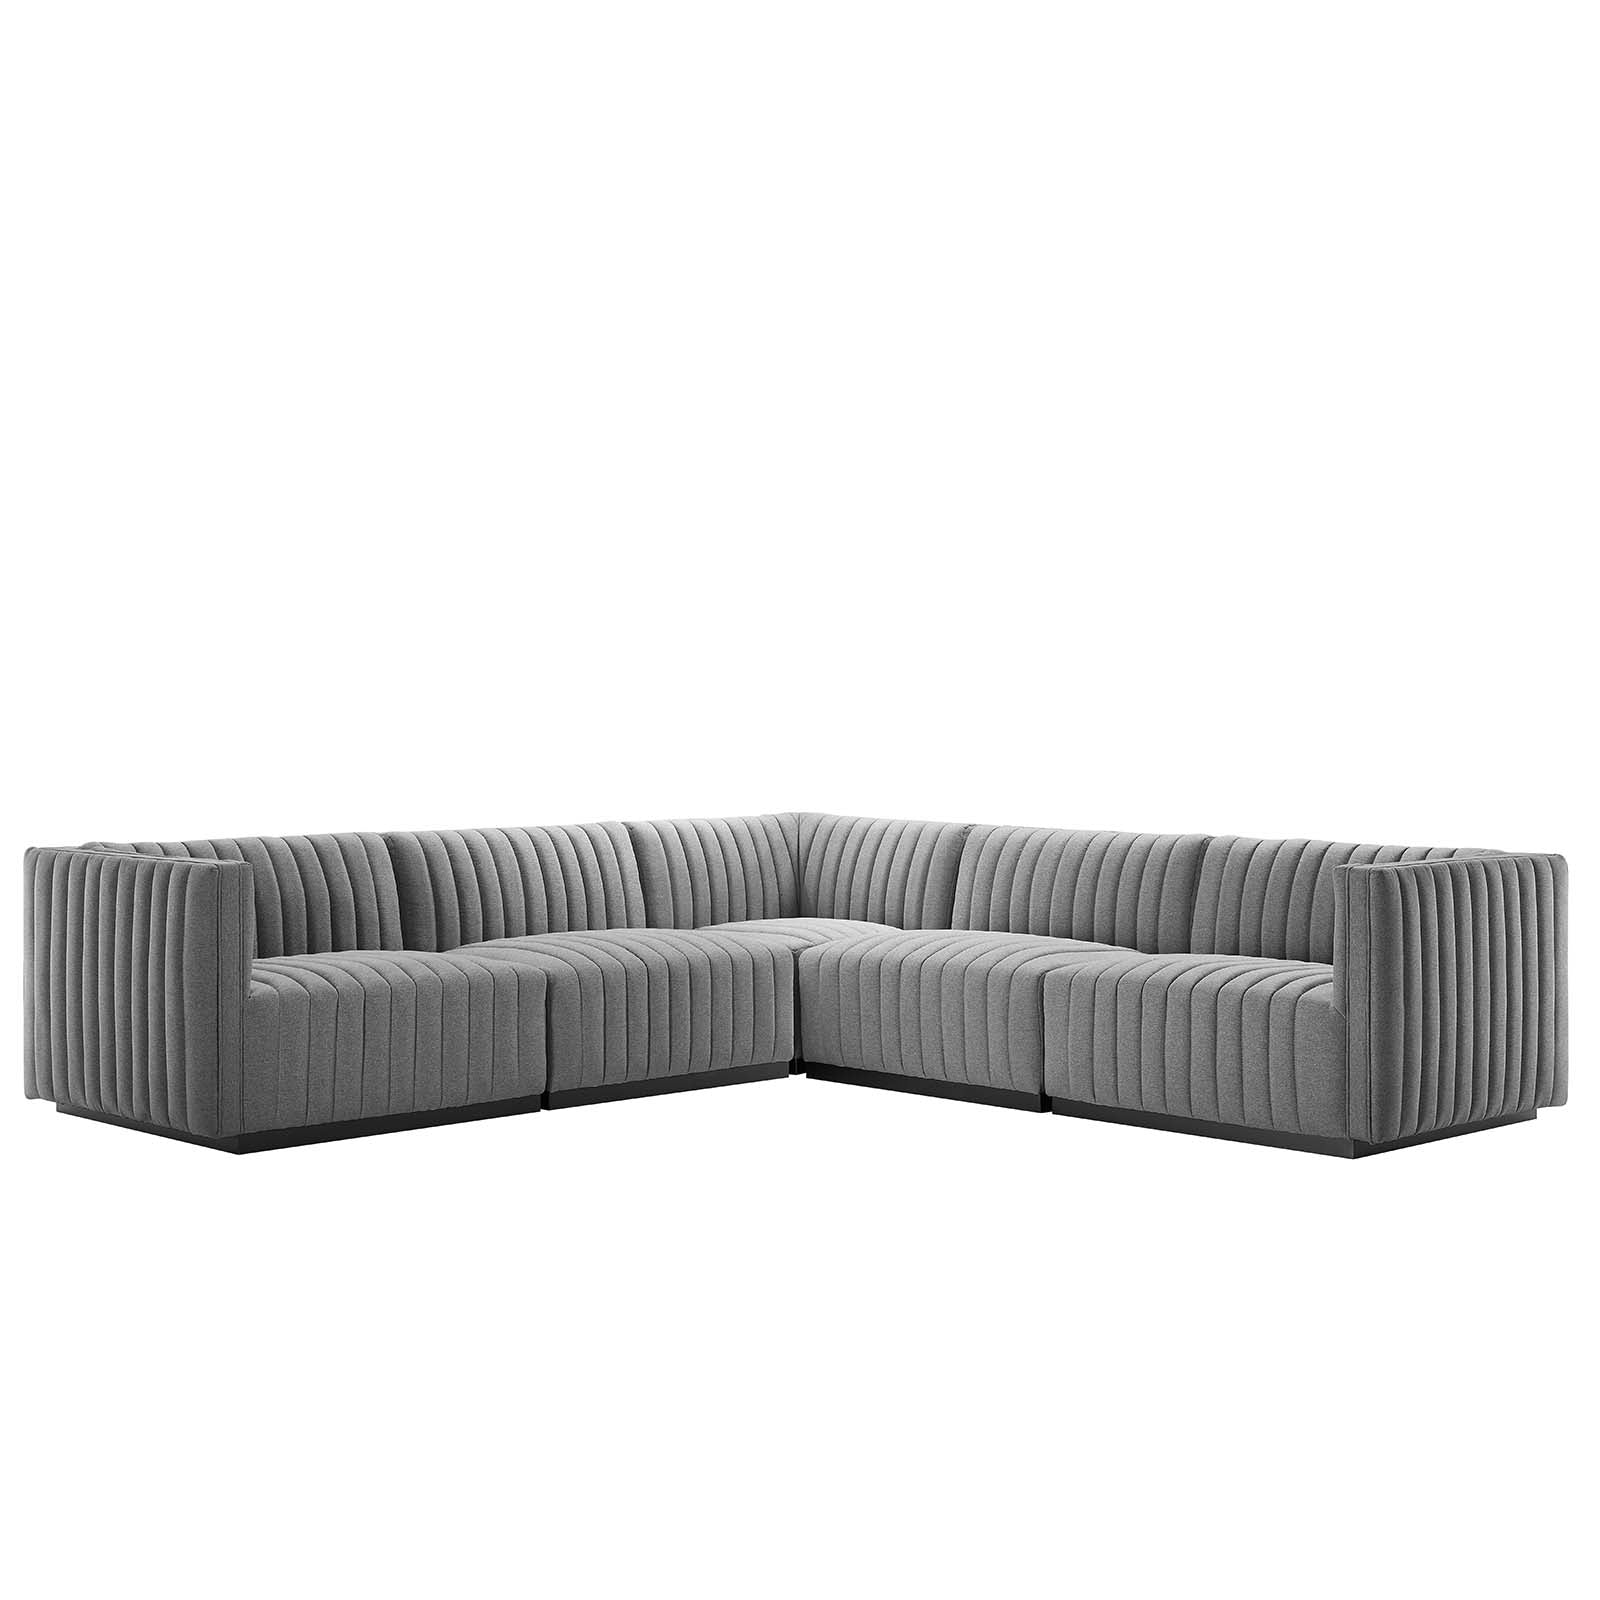 Conjure Channel Tufted Upholstered Fabric 5-Piece L-Shaped Sectional - East Shore Modern Home Furnishings